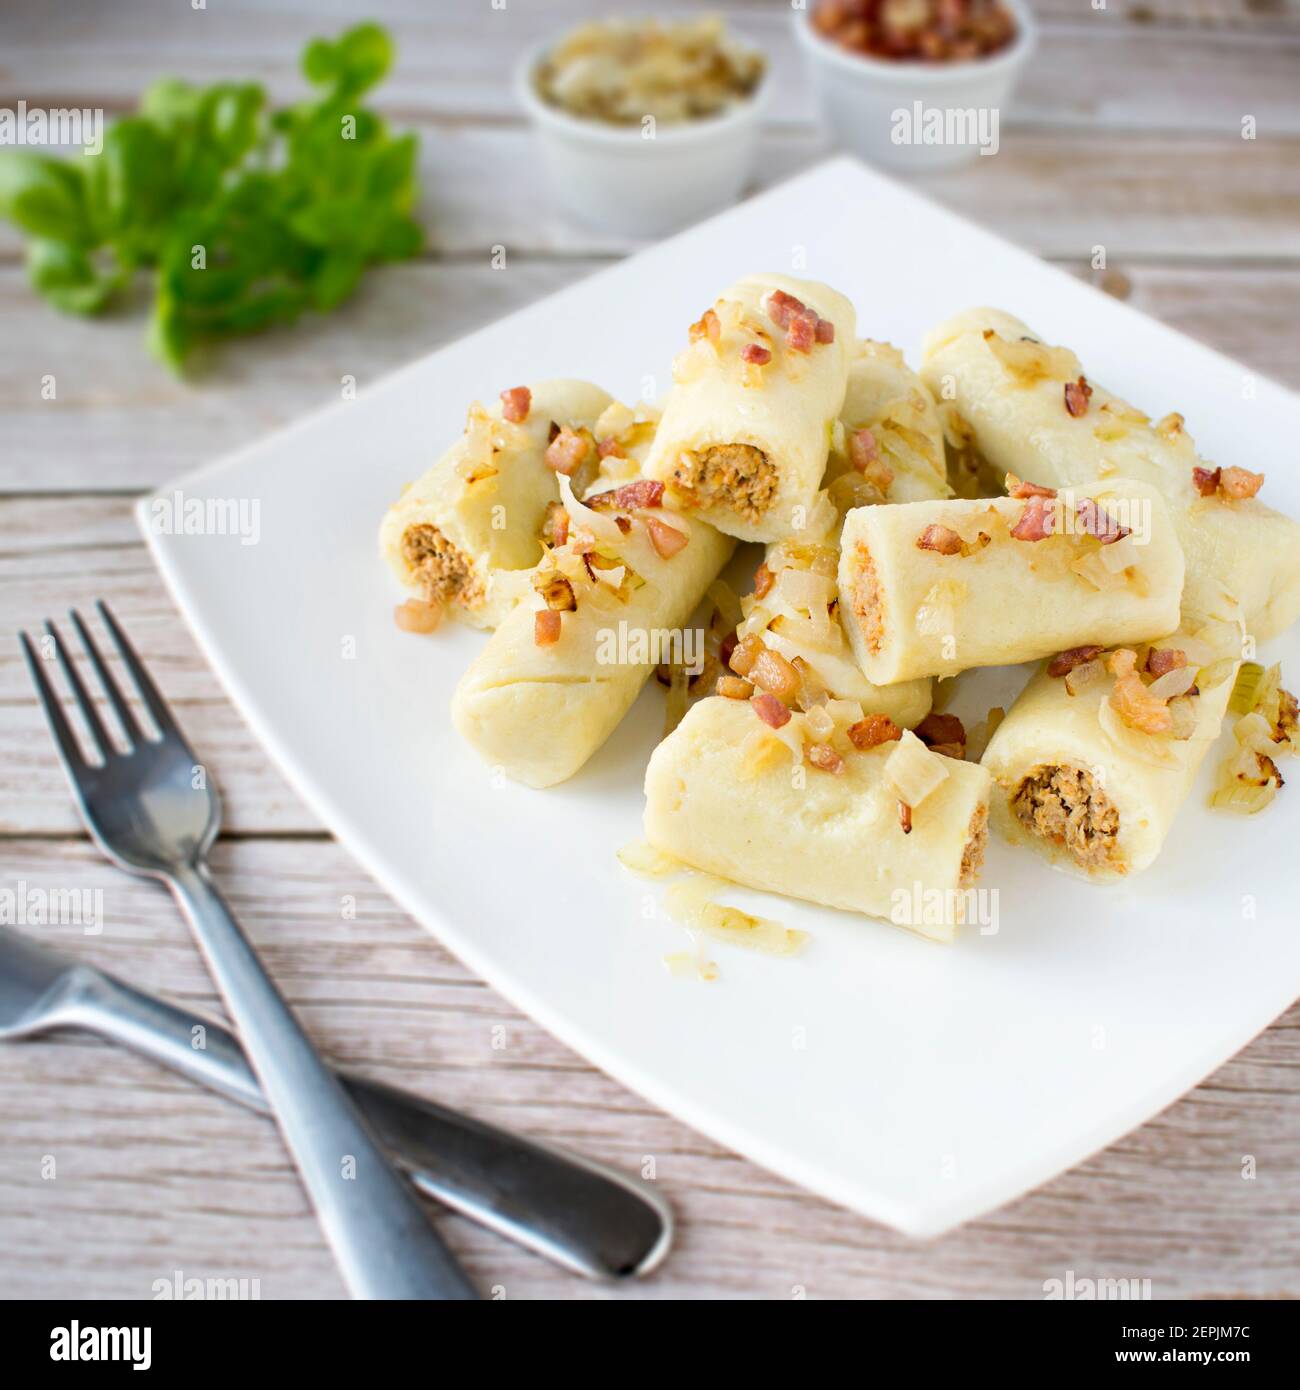 Potato dumplings with minced meat, cracklings, and onion. Stock Photo